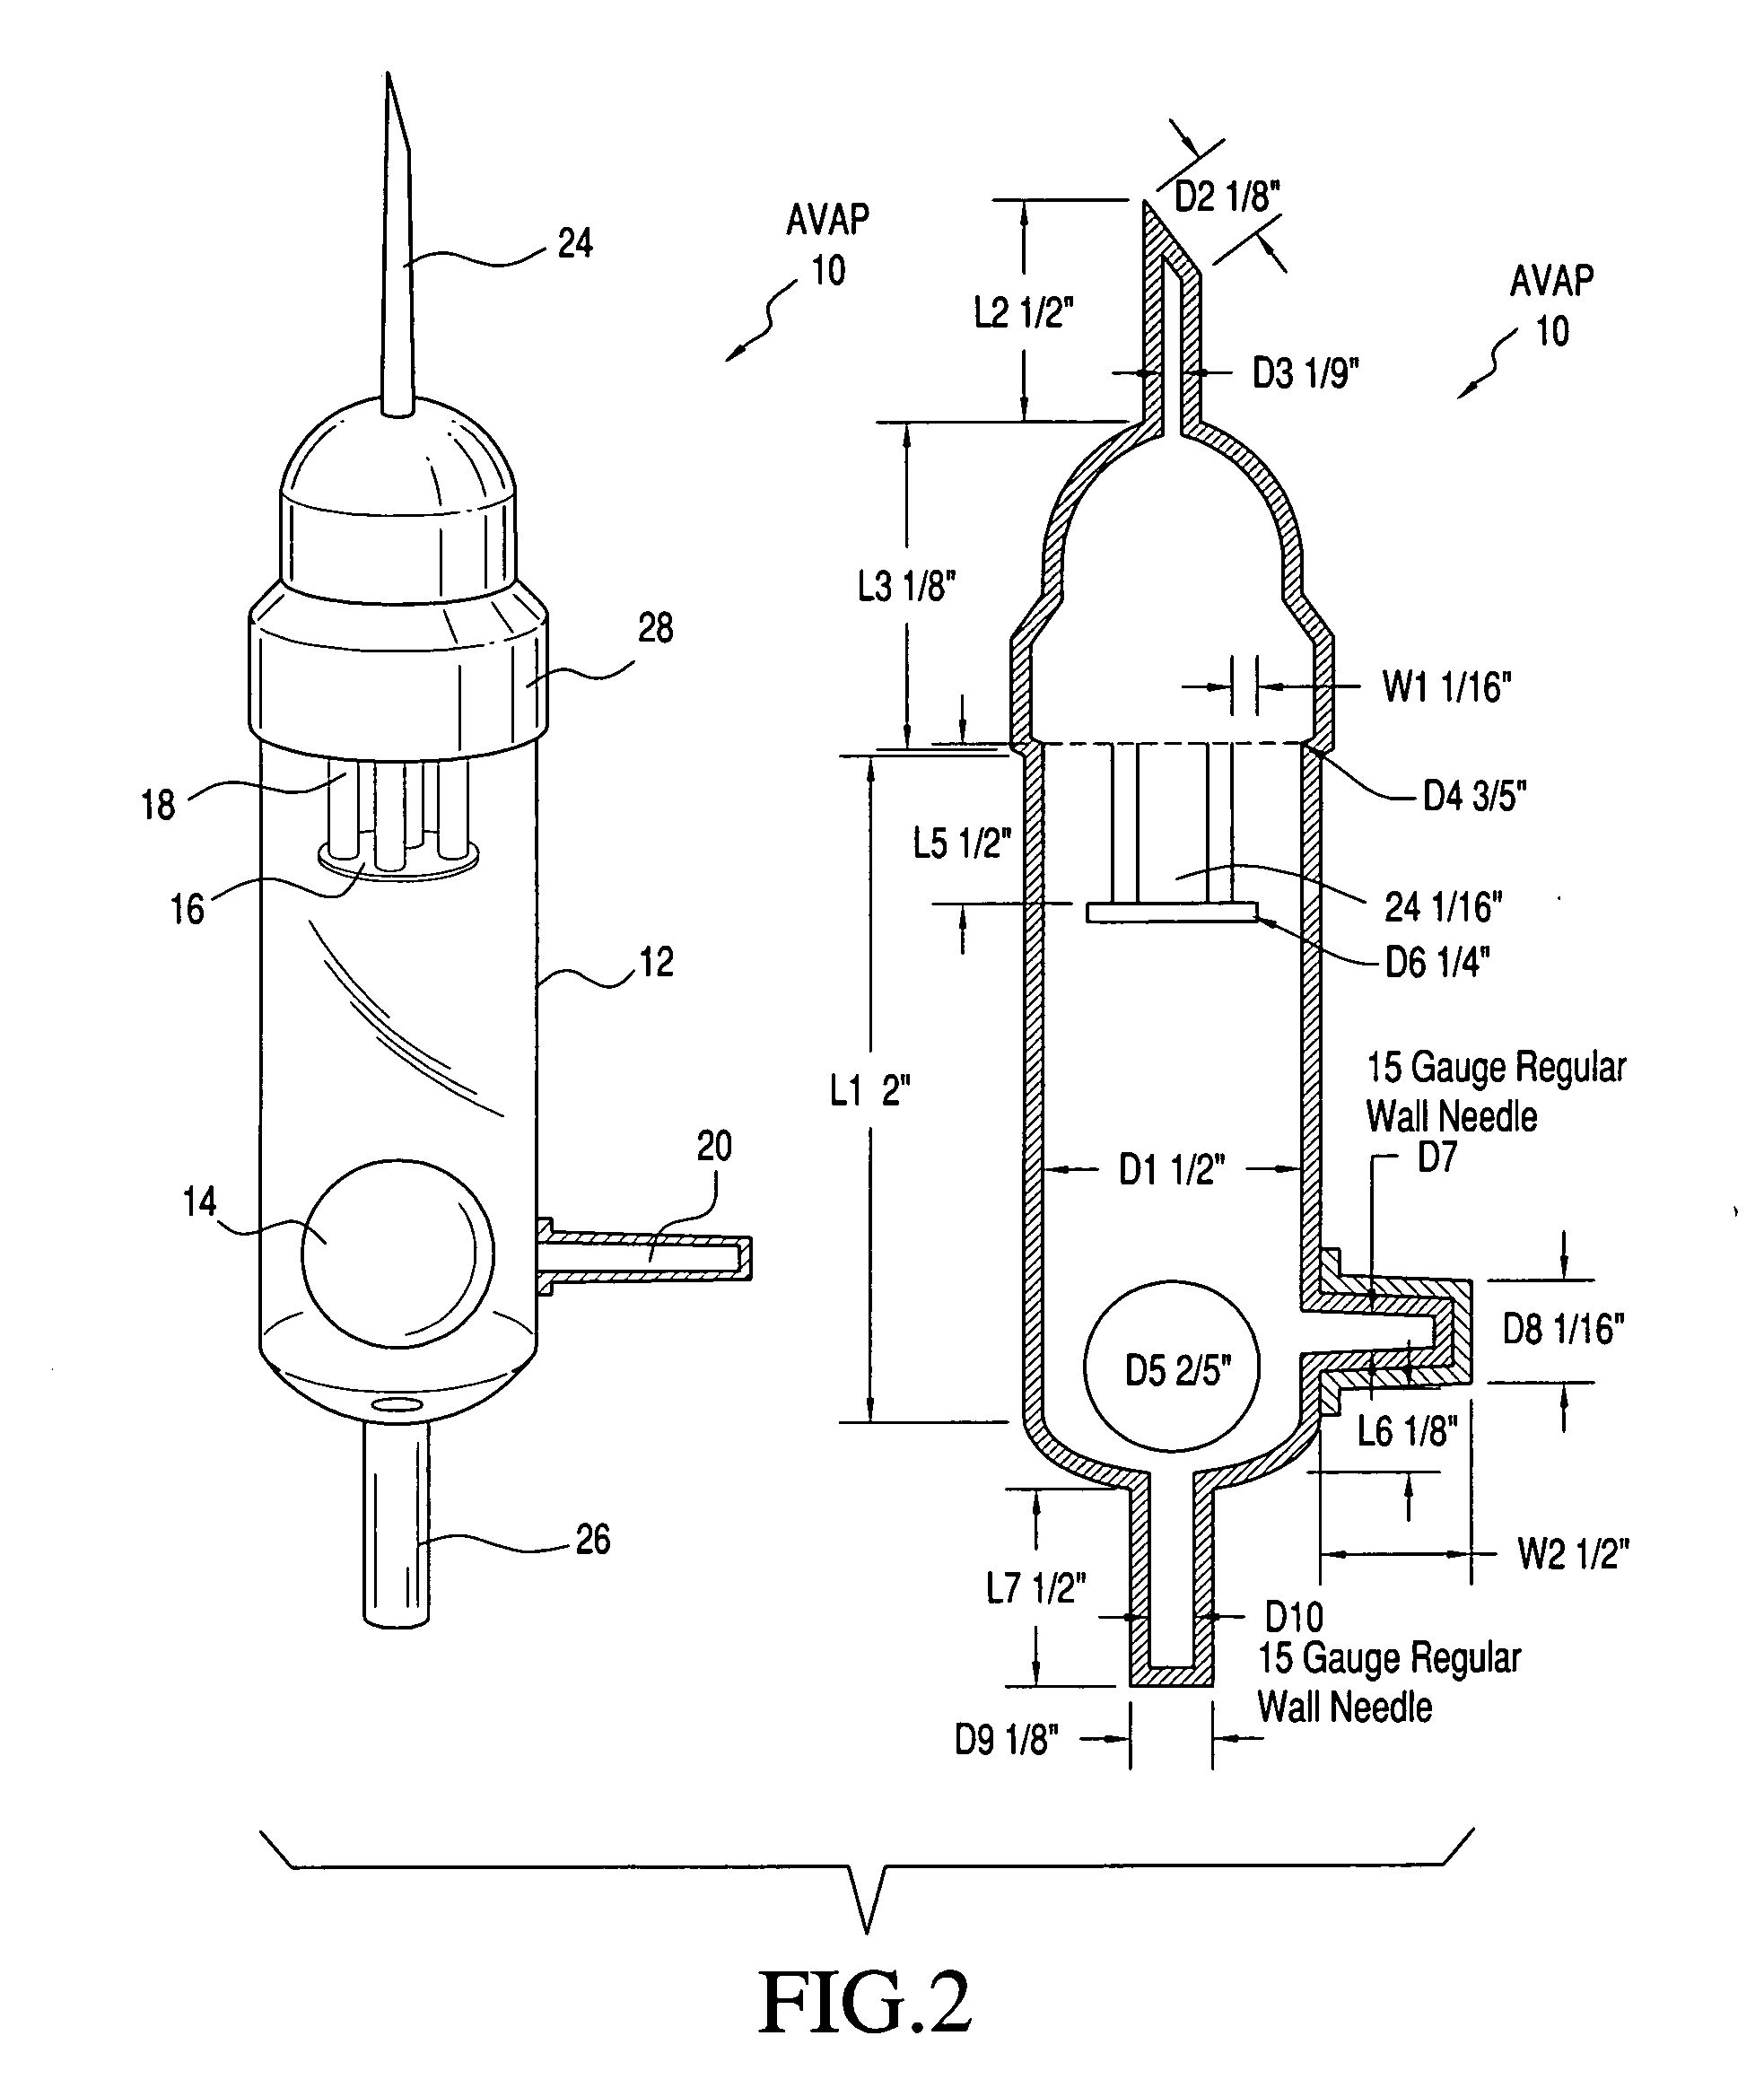 AVAP: air valve and port for intravenous (IV) tubing